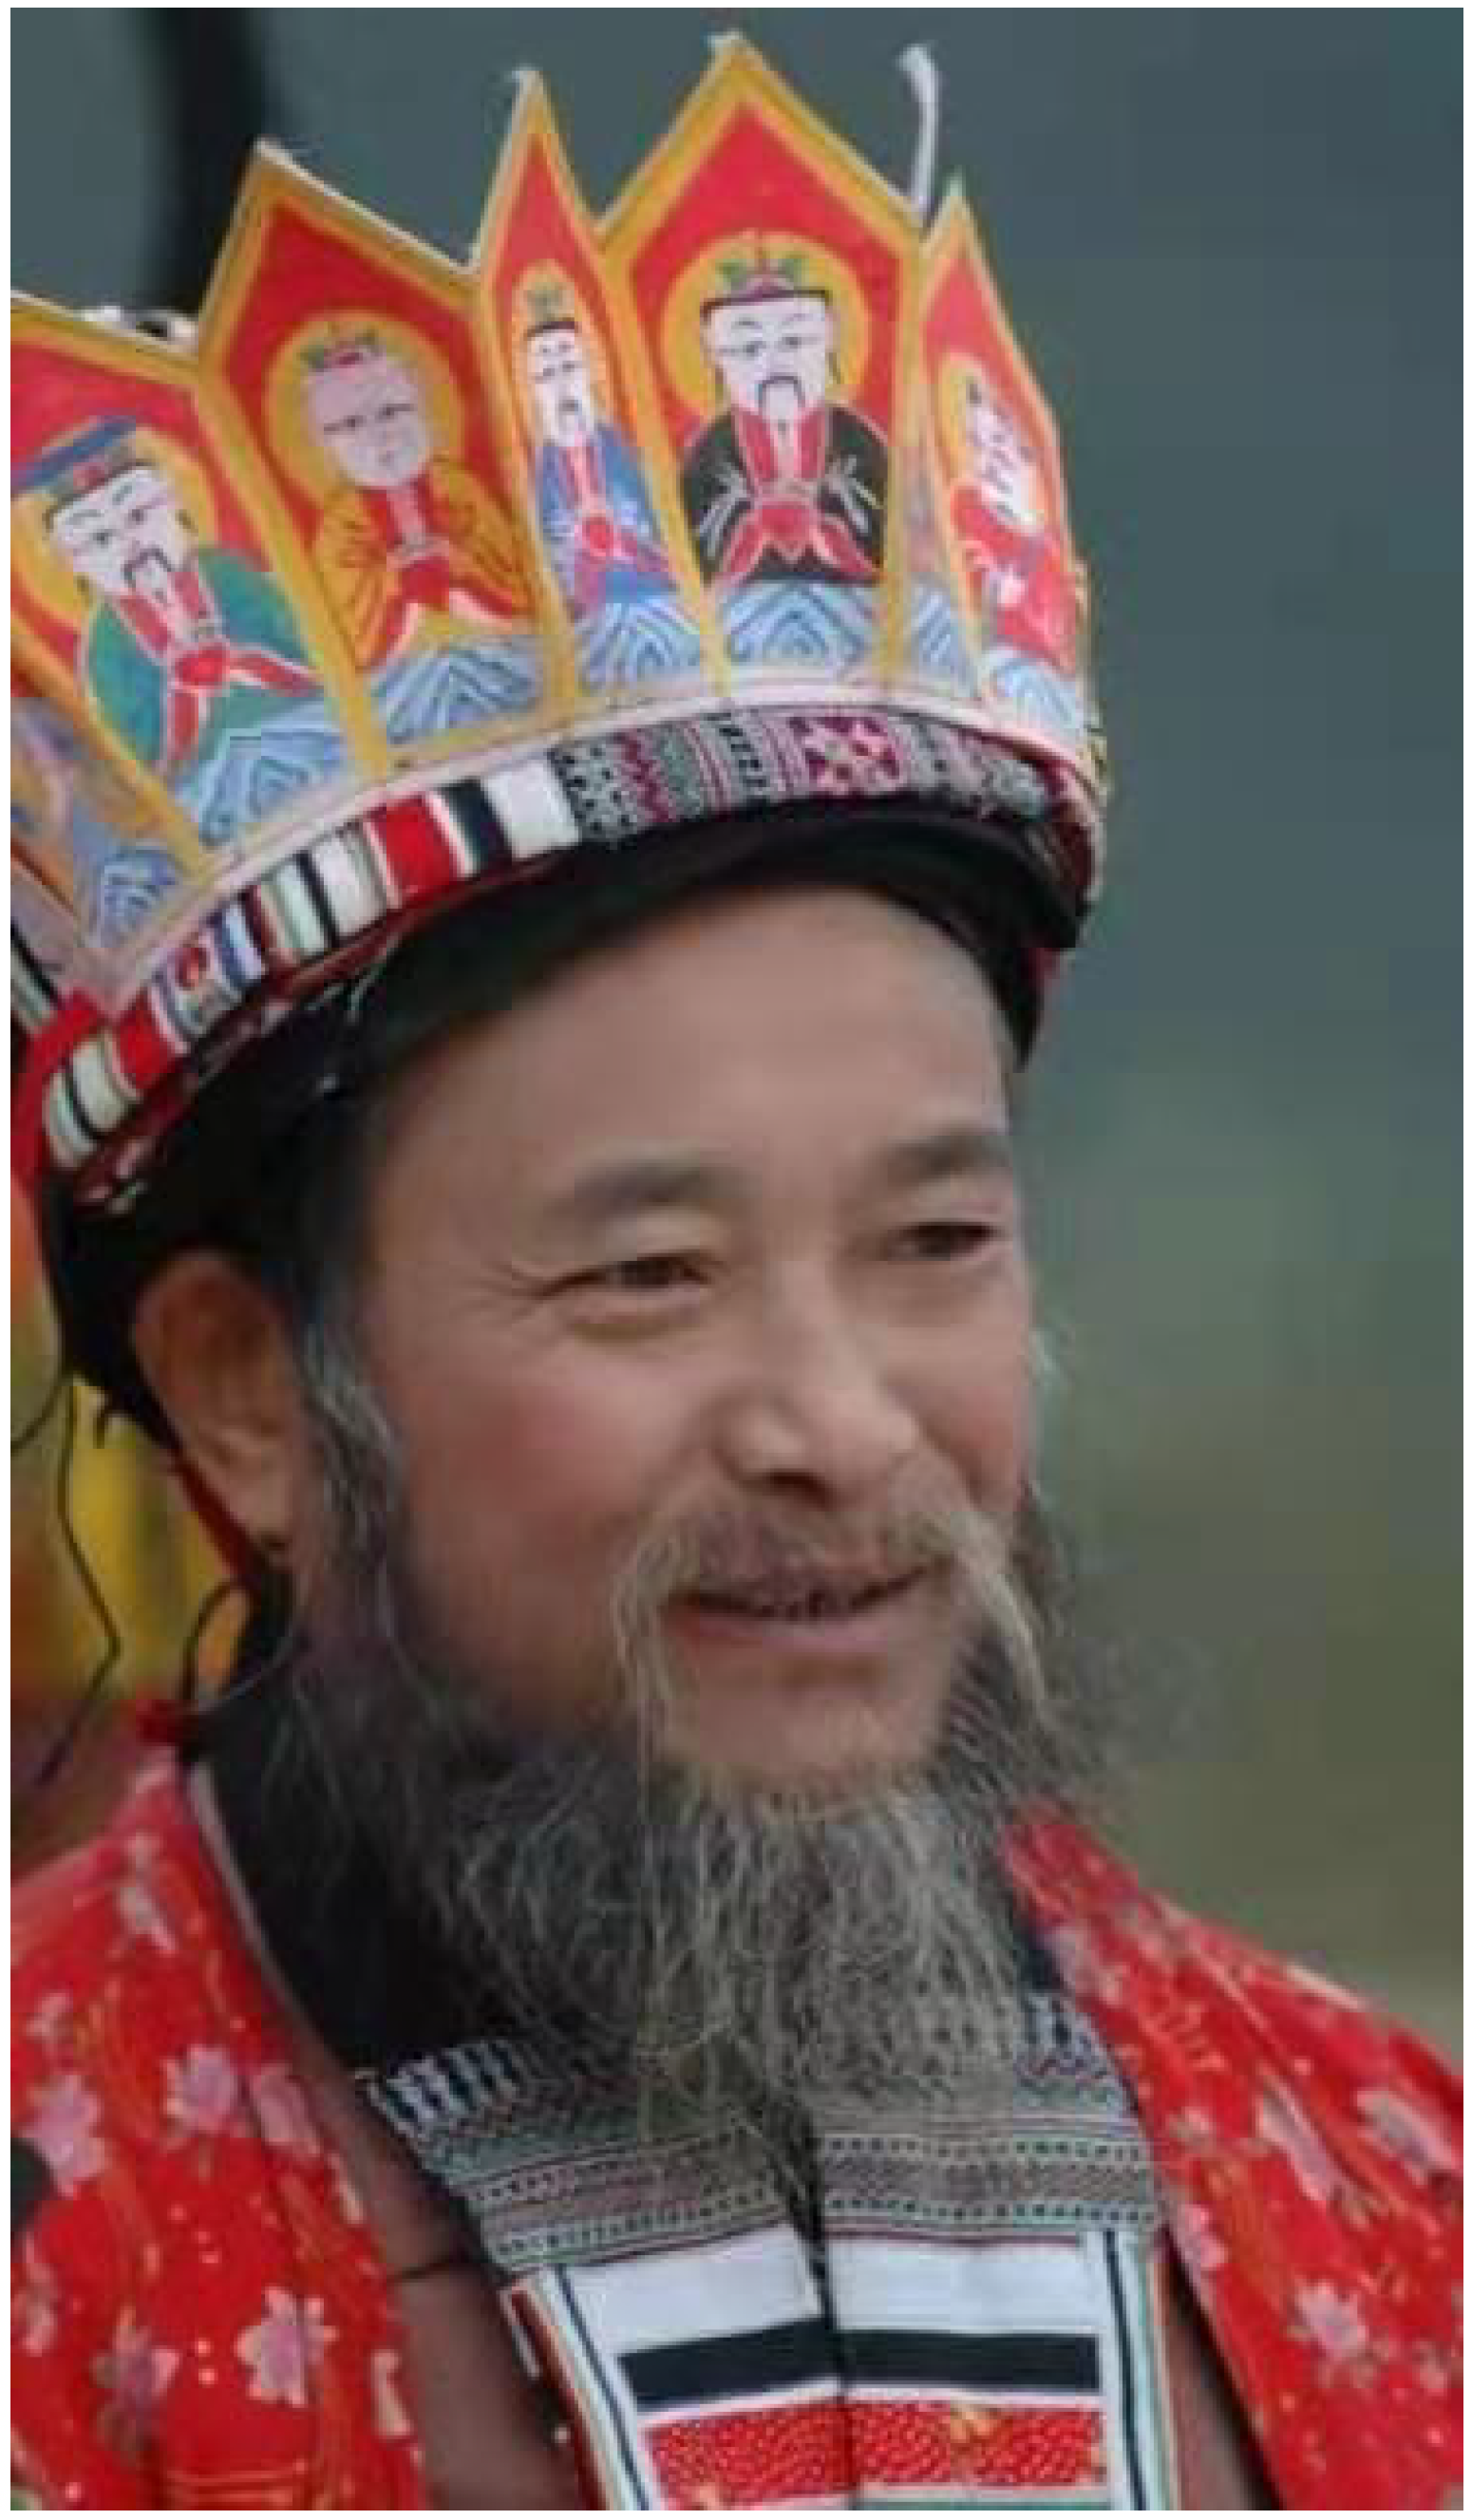 Religions Free Full-Text Reciprocating and Connecting The Ritual Structure and Social Functions of Yao Huan Jia Yuan in Huangdong, Southwest China picture image